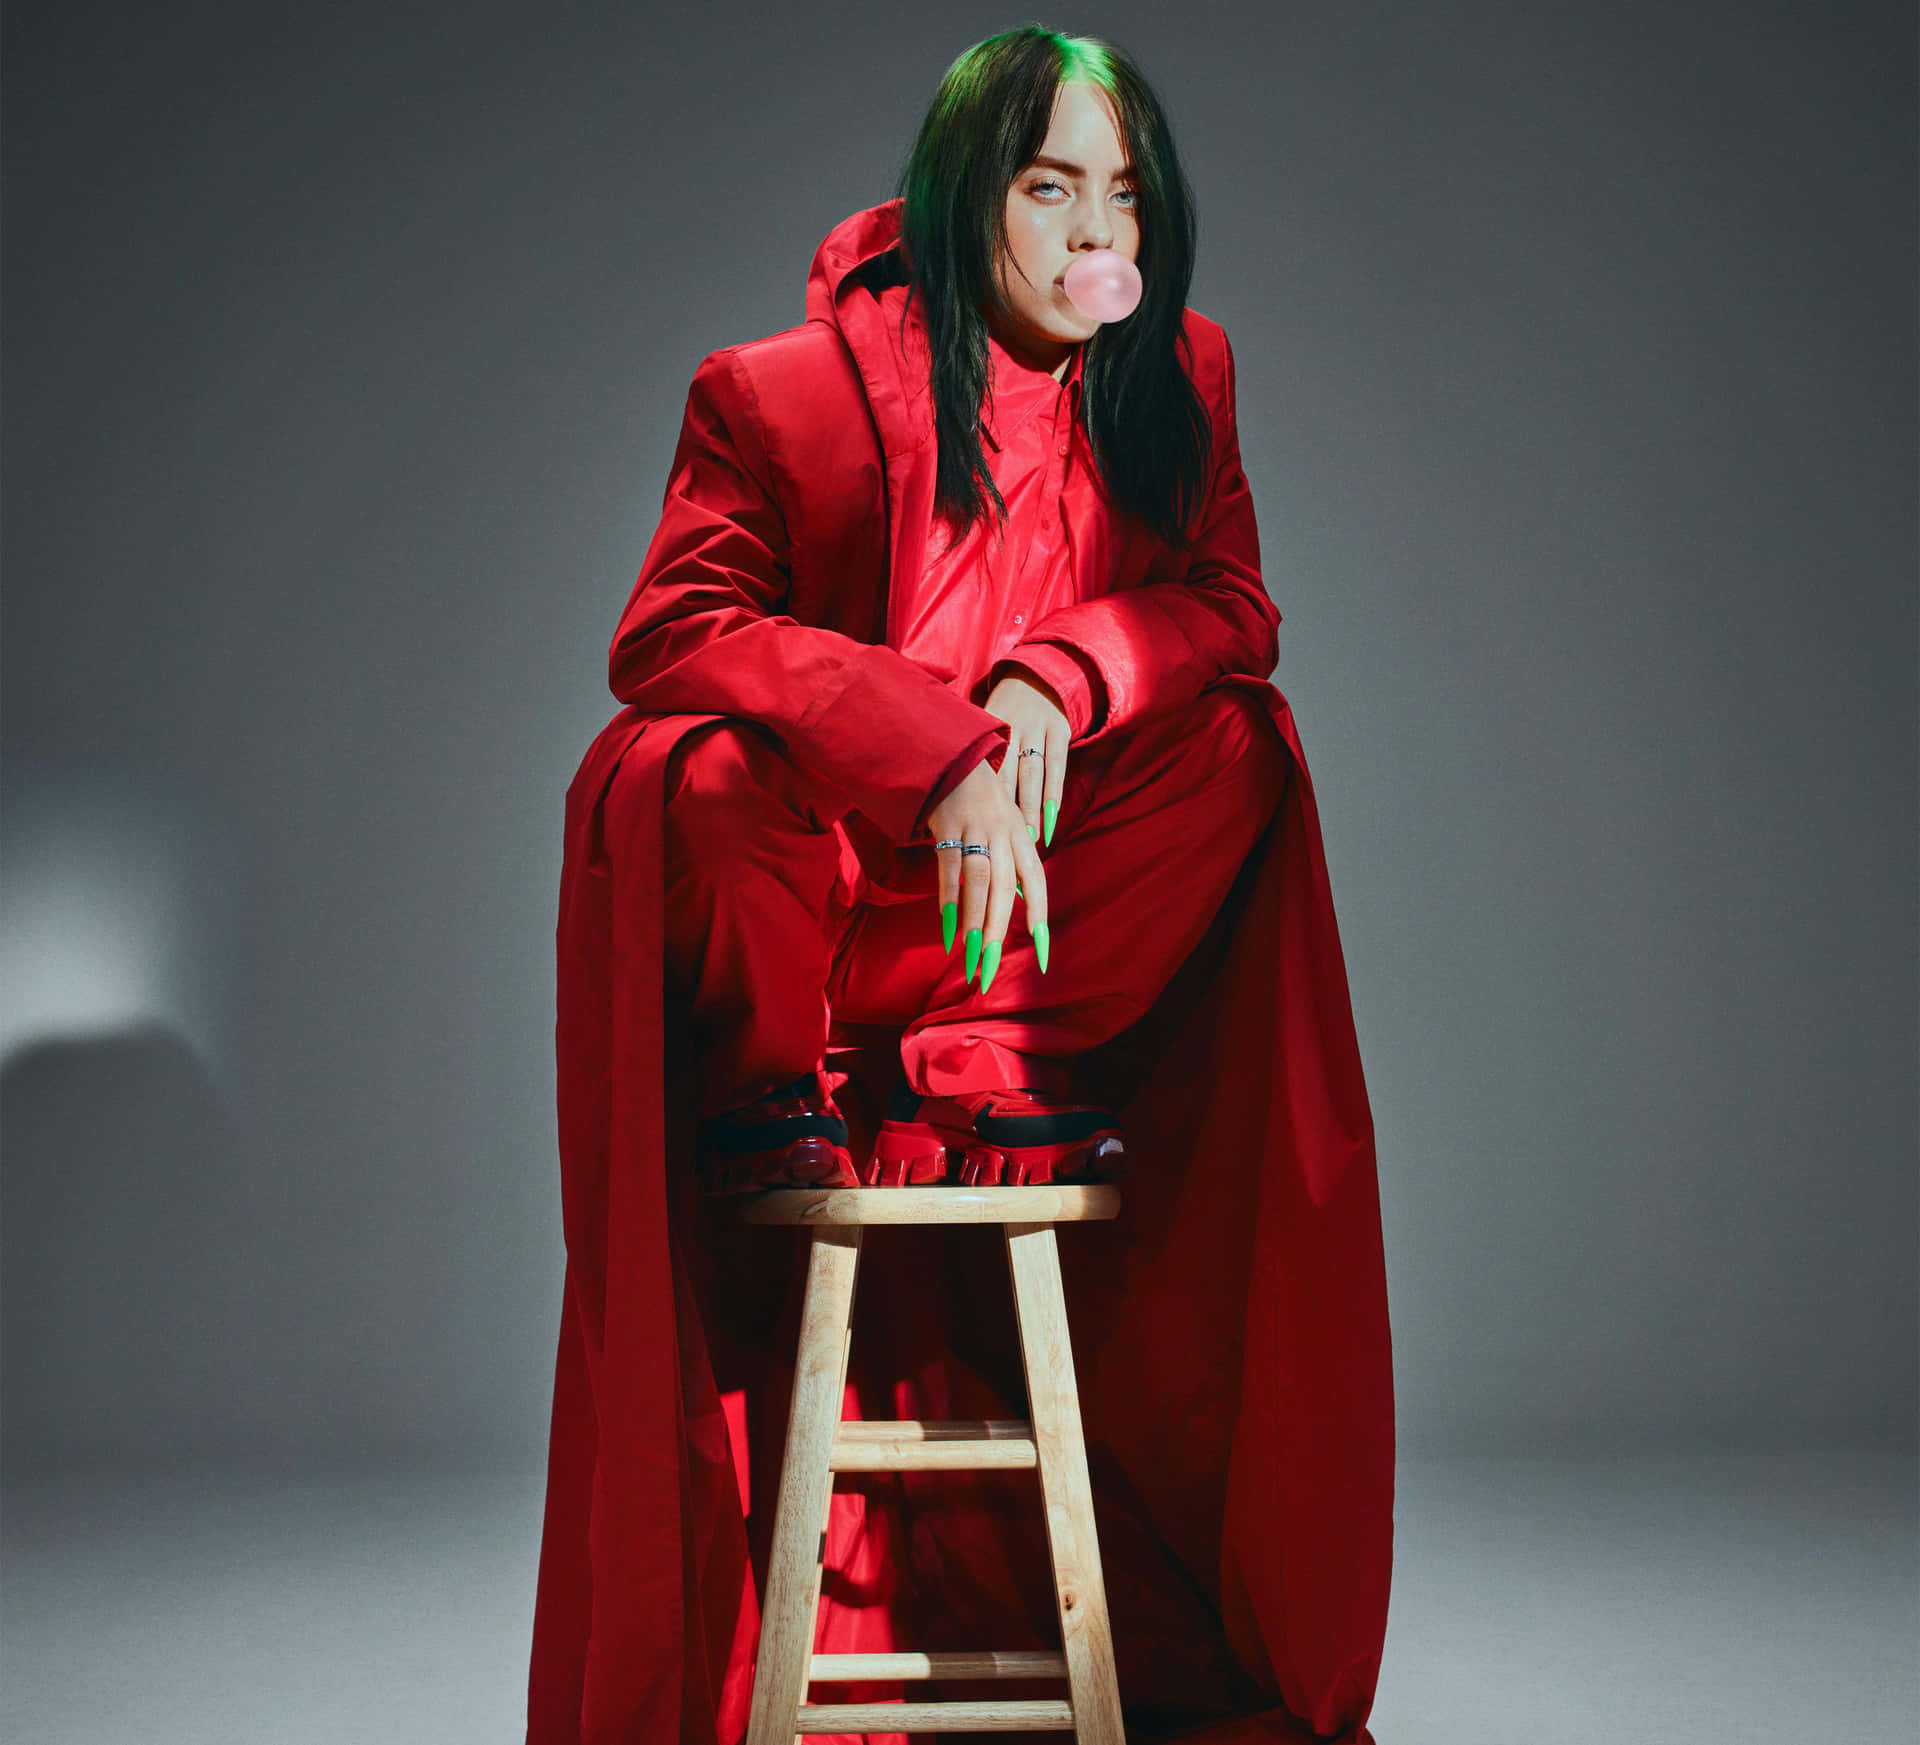 Billie Eilish looks flawless donning a denim jacket and highlighter green hair